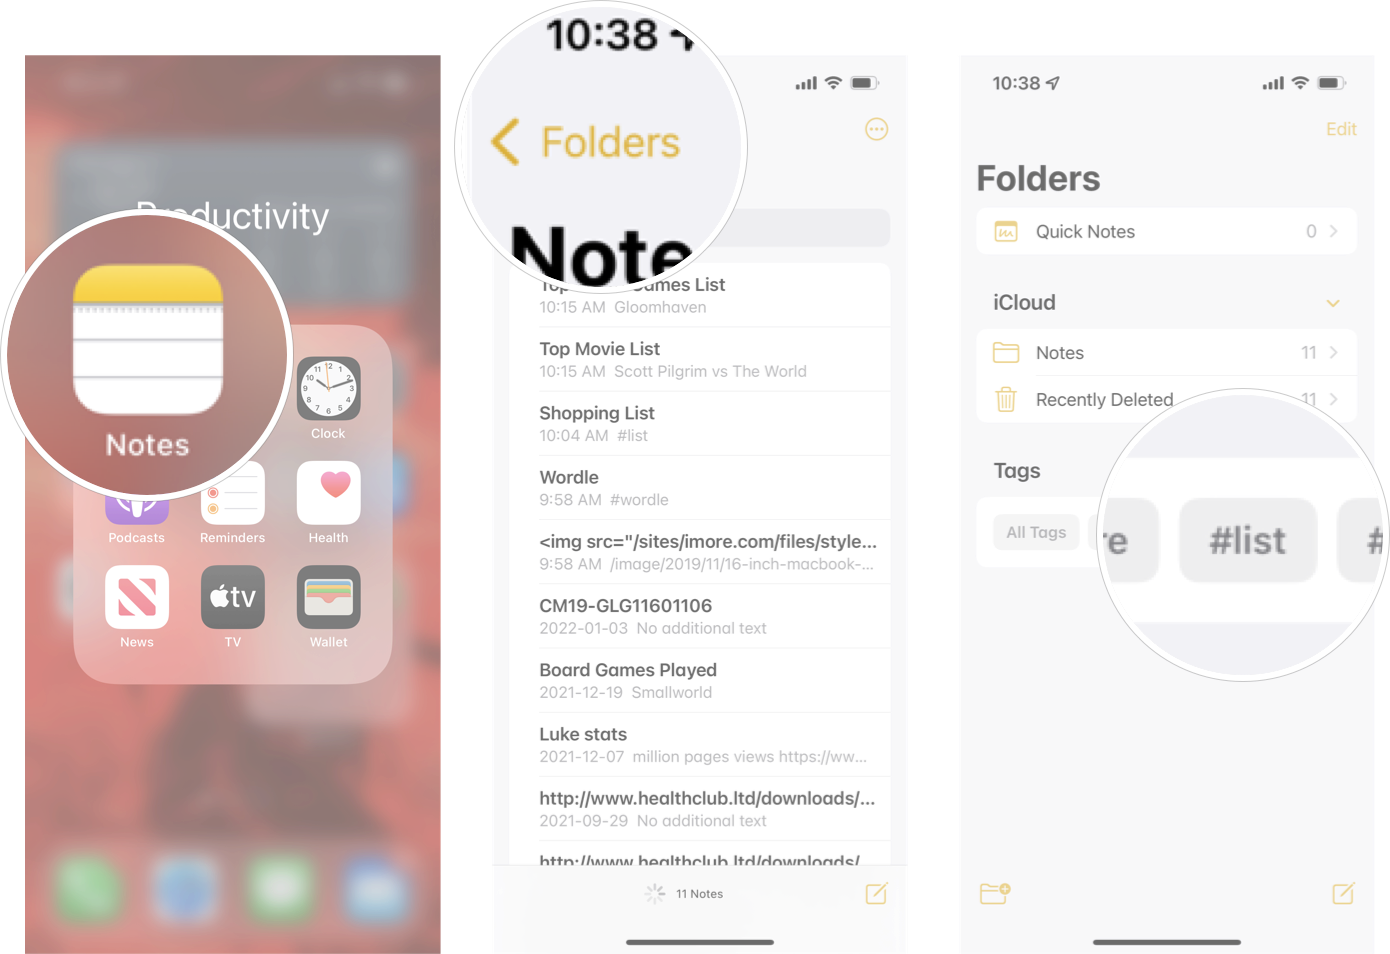 How To Browse Tags In Notes In IOS 15: Launch Notes, tap folders, and then tap the tag you want.